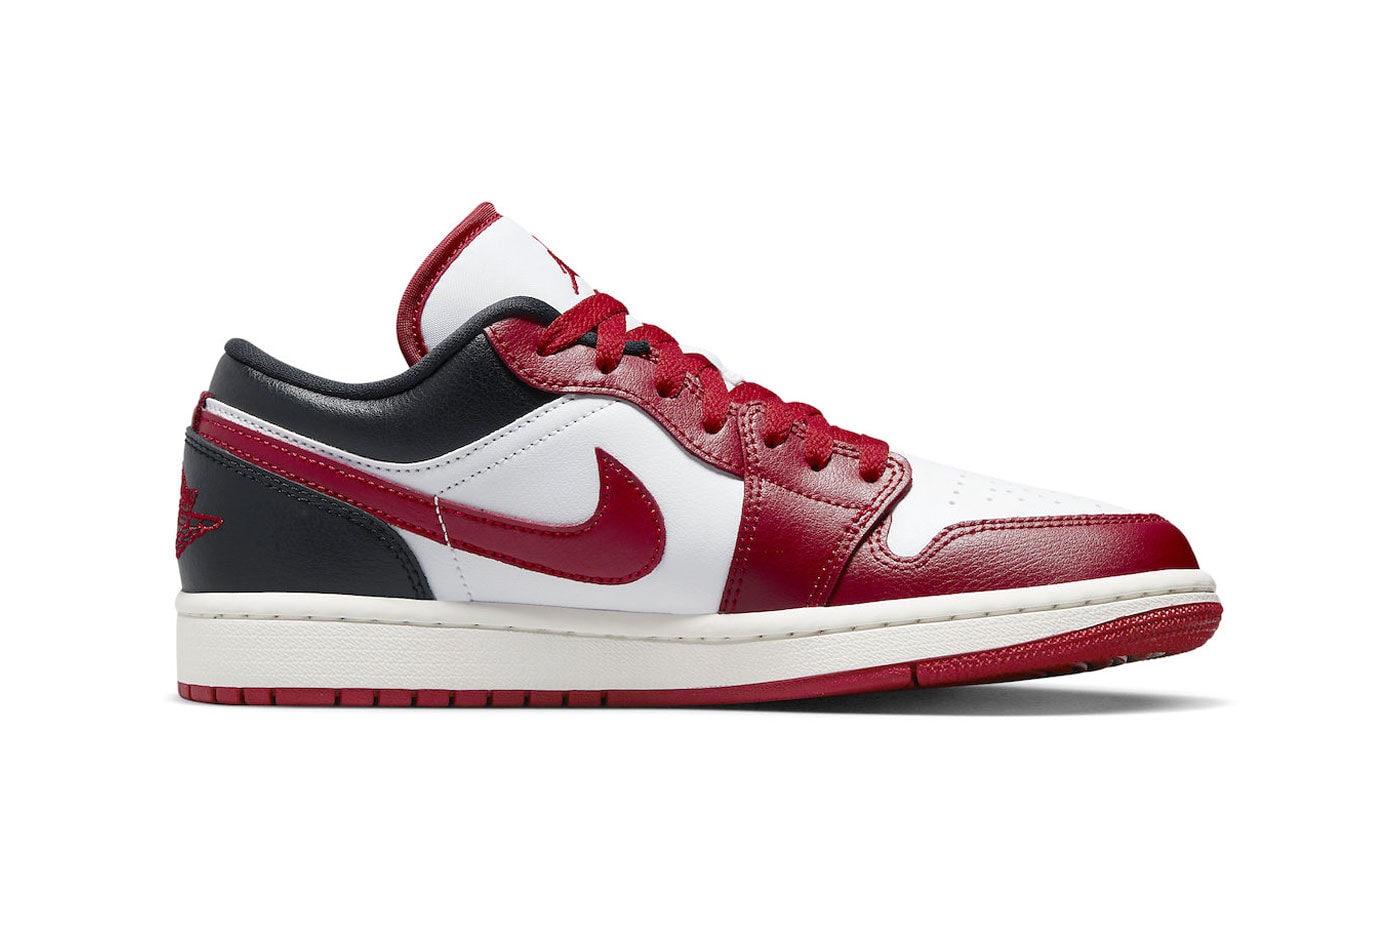 Air Jordan 1 Low Chicago Like Official Look Release Info DC0774-160